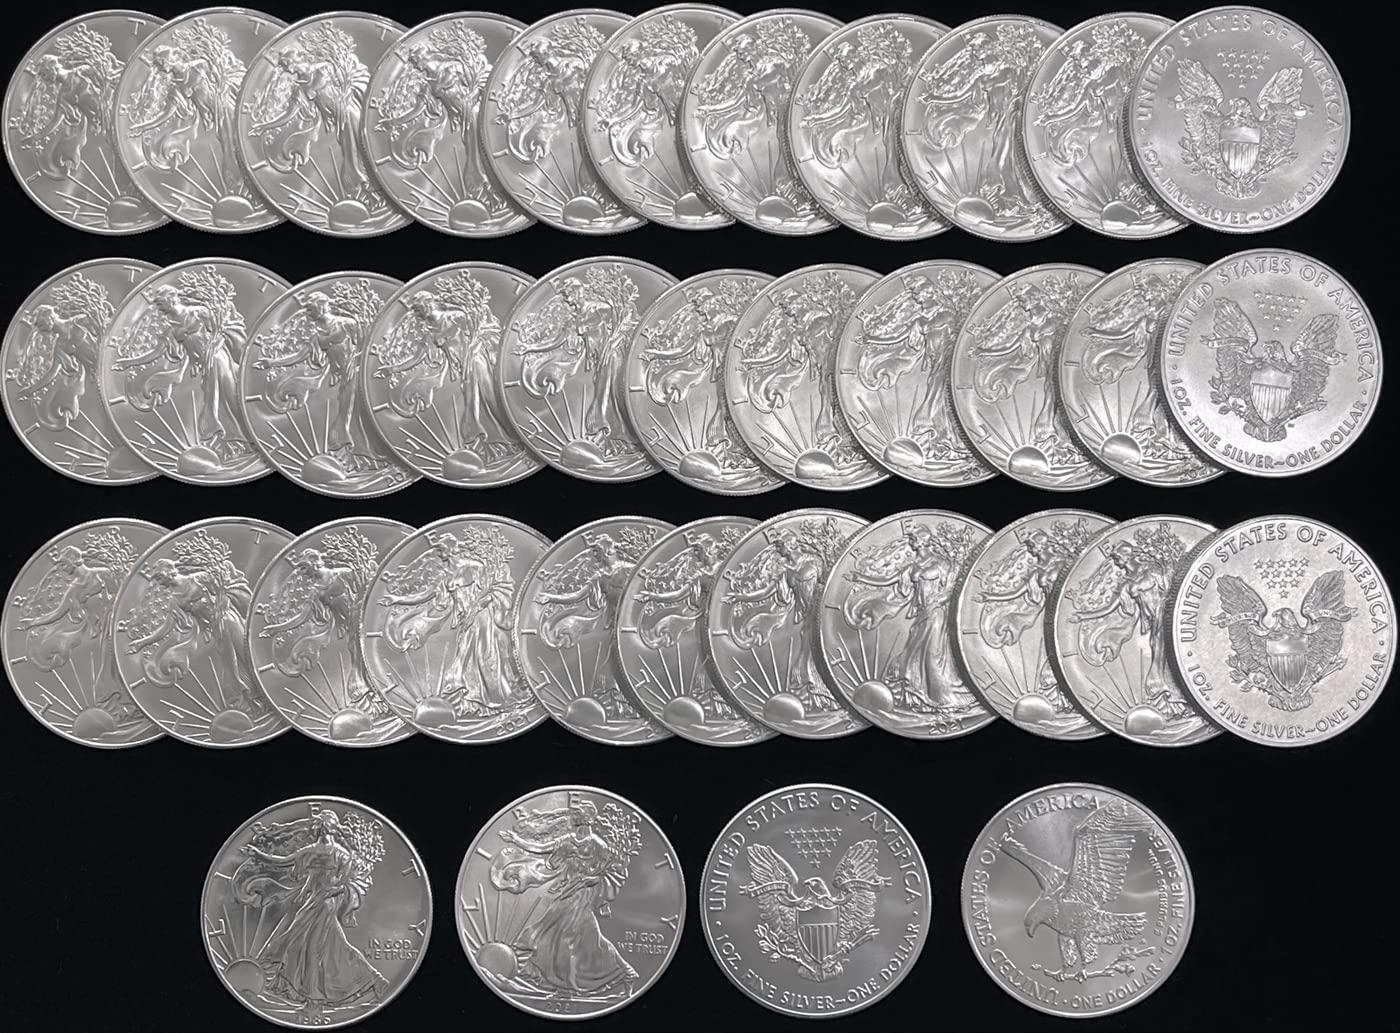 Silver Eagle Complete Set of BU American Silver Eagle Dollars 1986 to 2021 Includes Type 1 and Type 2